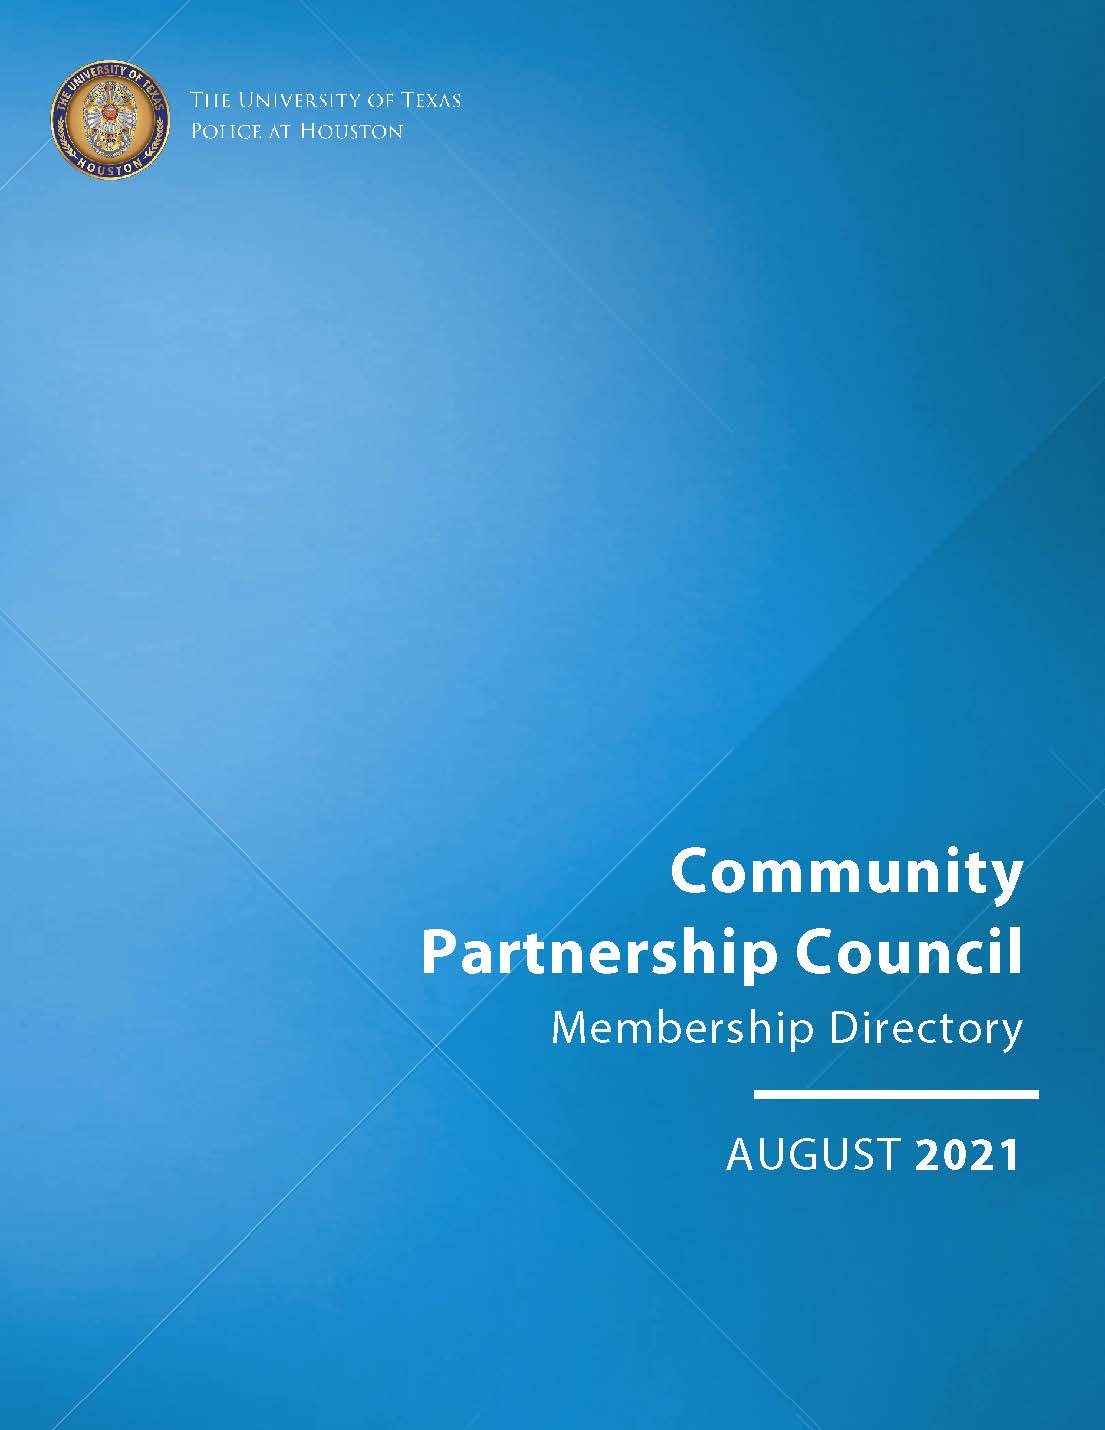 Community Partnership Council Membership Directory, August 2021 Cover Page